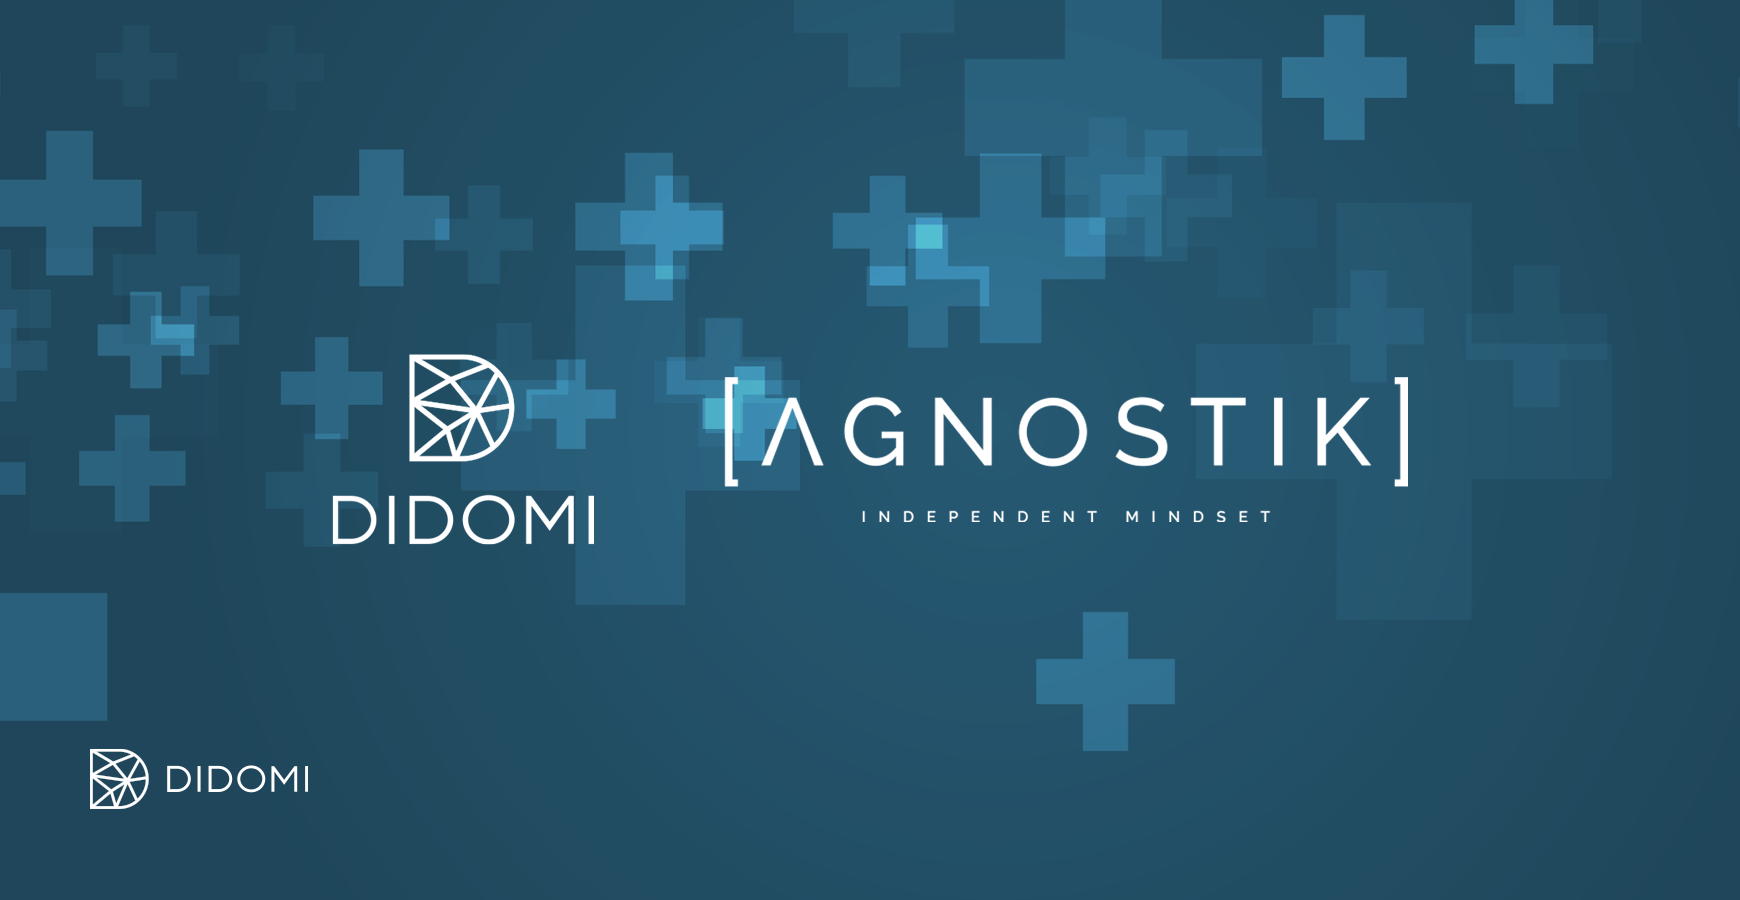 Didomi is acquiring data privacy and compliance startup Agnostik